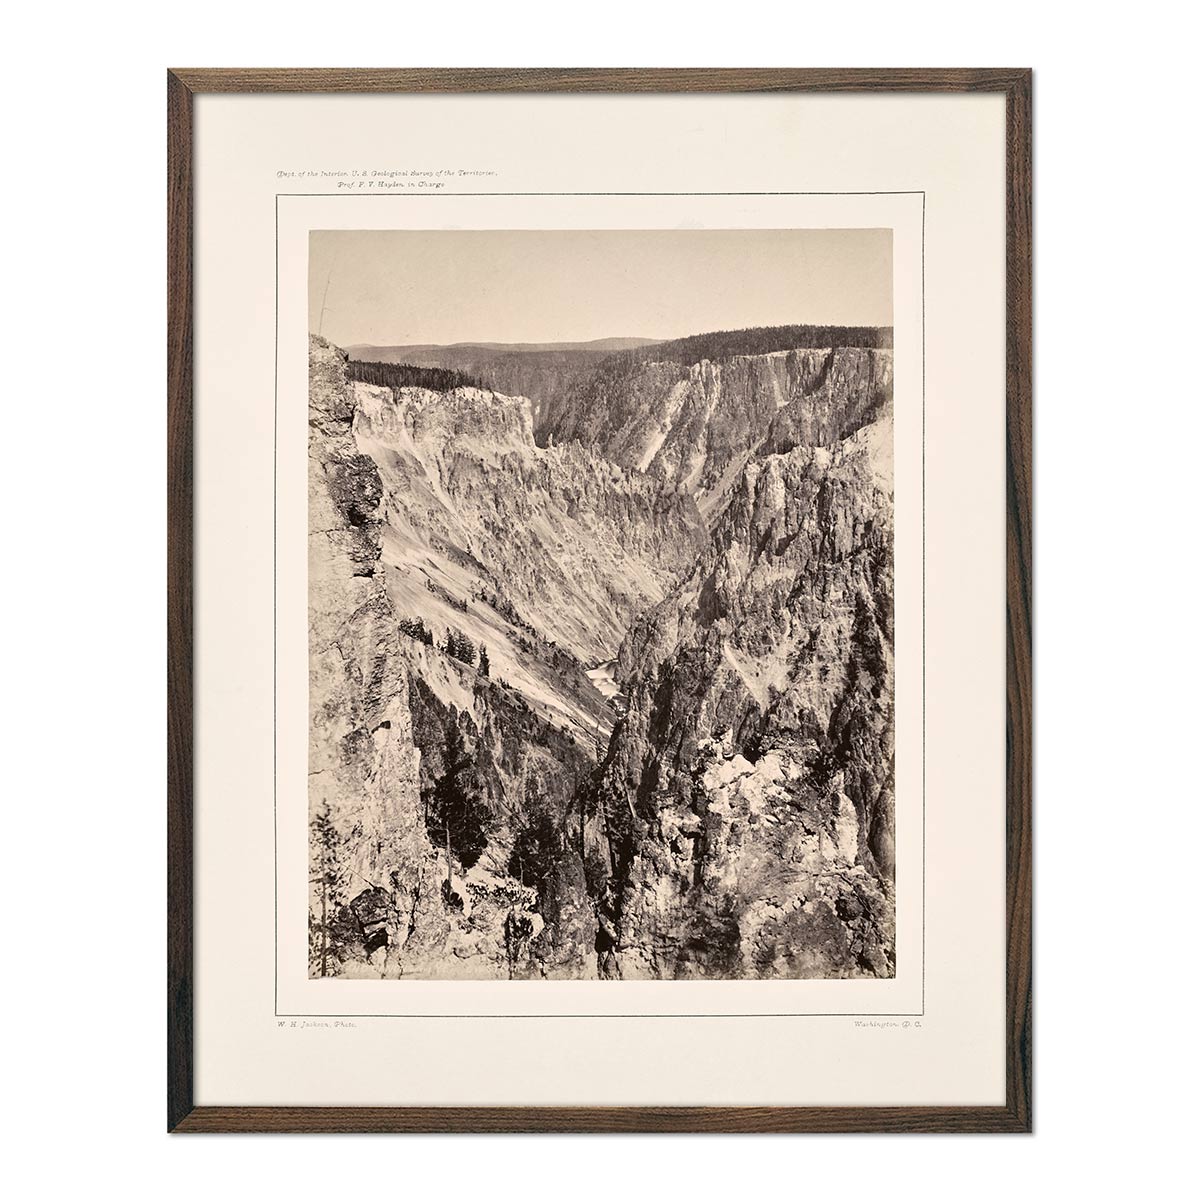 https://cdn.shopify.com/s/files/1/0272/4781/products/The_Grand_Canyon_One_Mile_Below_the_Falls_1873_Walnut_1600x.jpg?v=1666899125